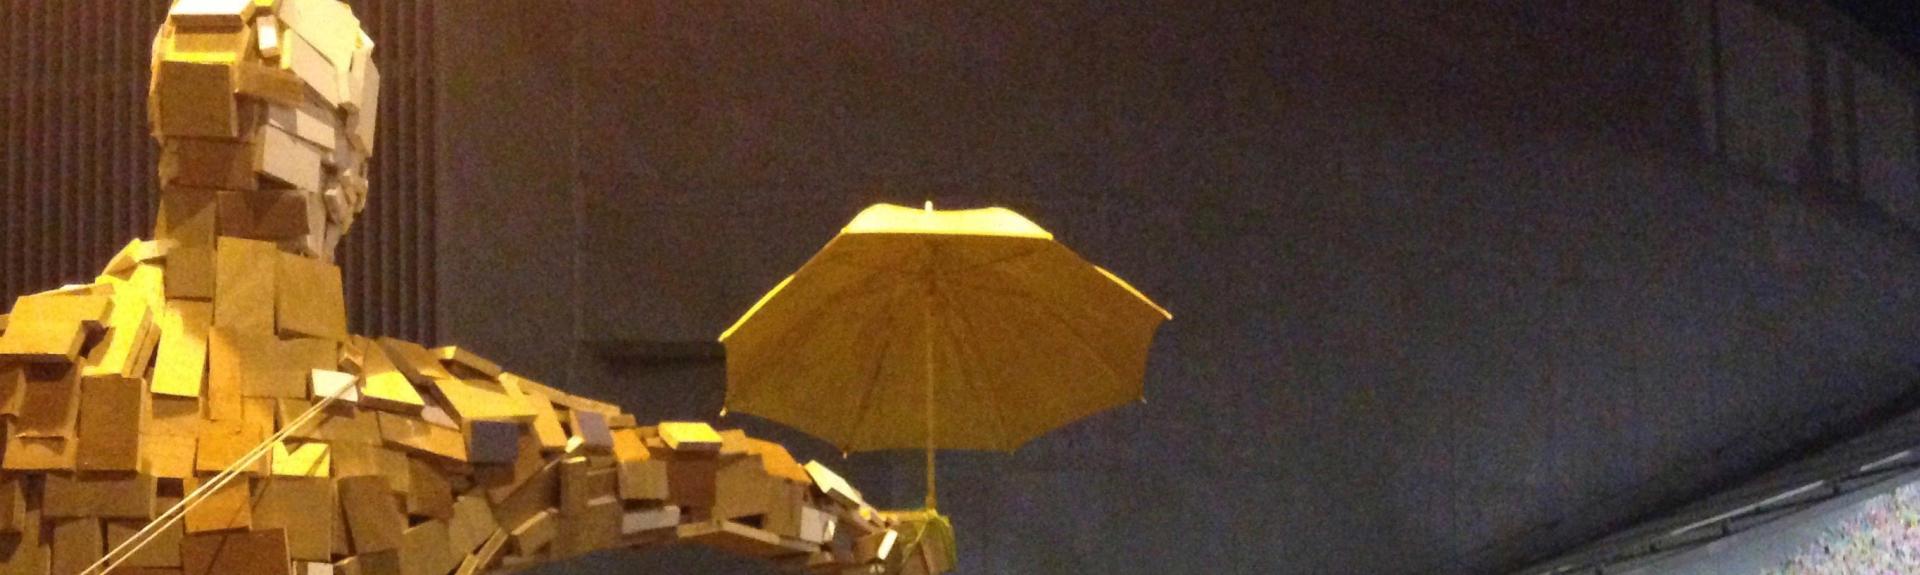 photo of “Umbrella Man” by Hong Kong artist Milk, with Post-It note covered “Lennon Wall.”